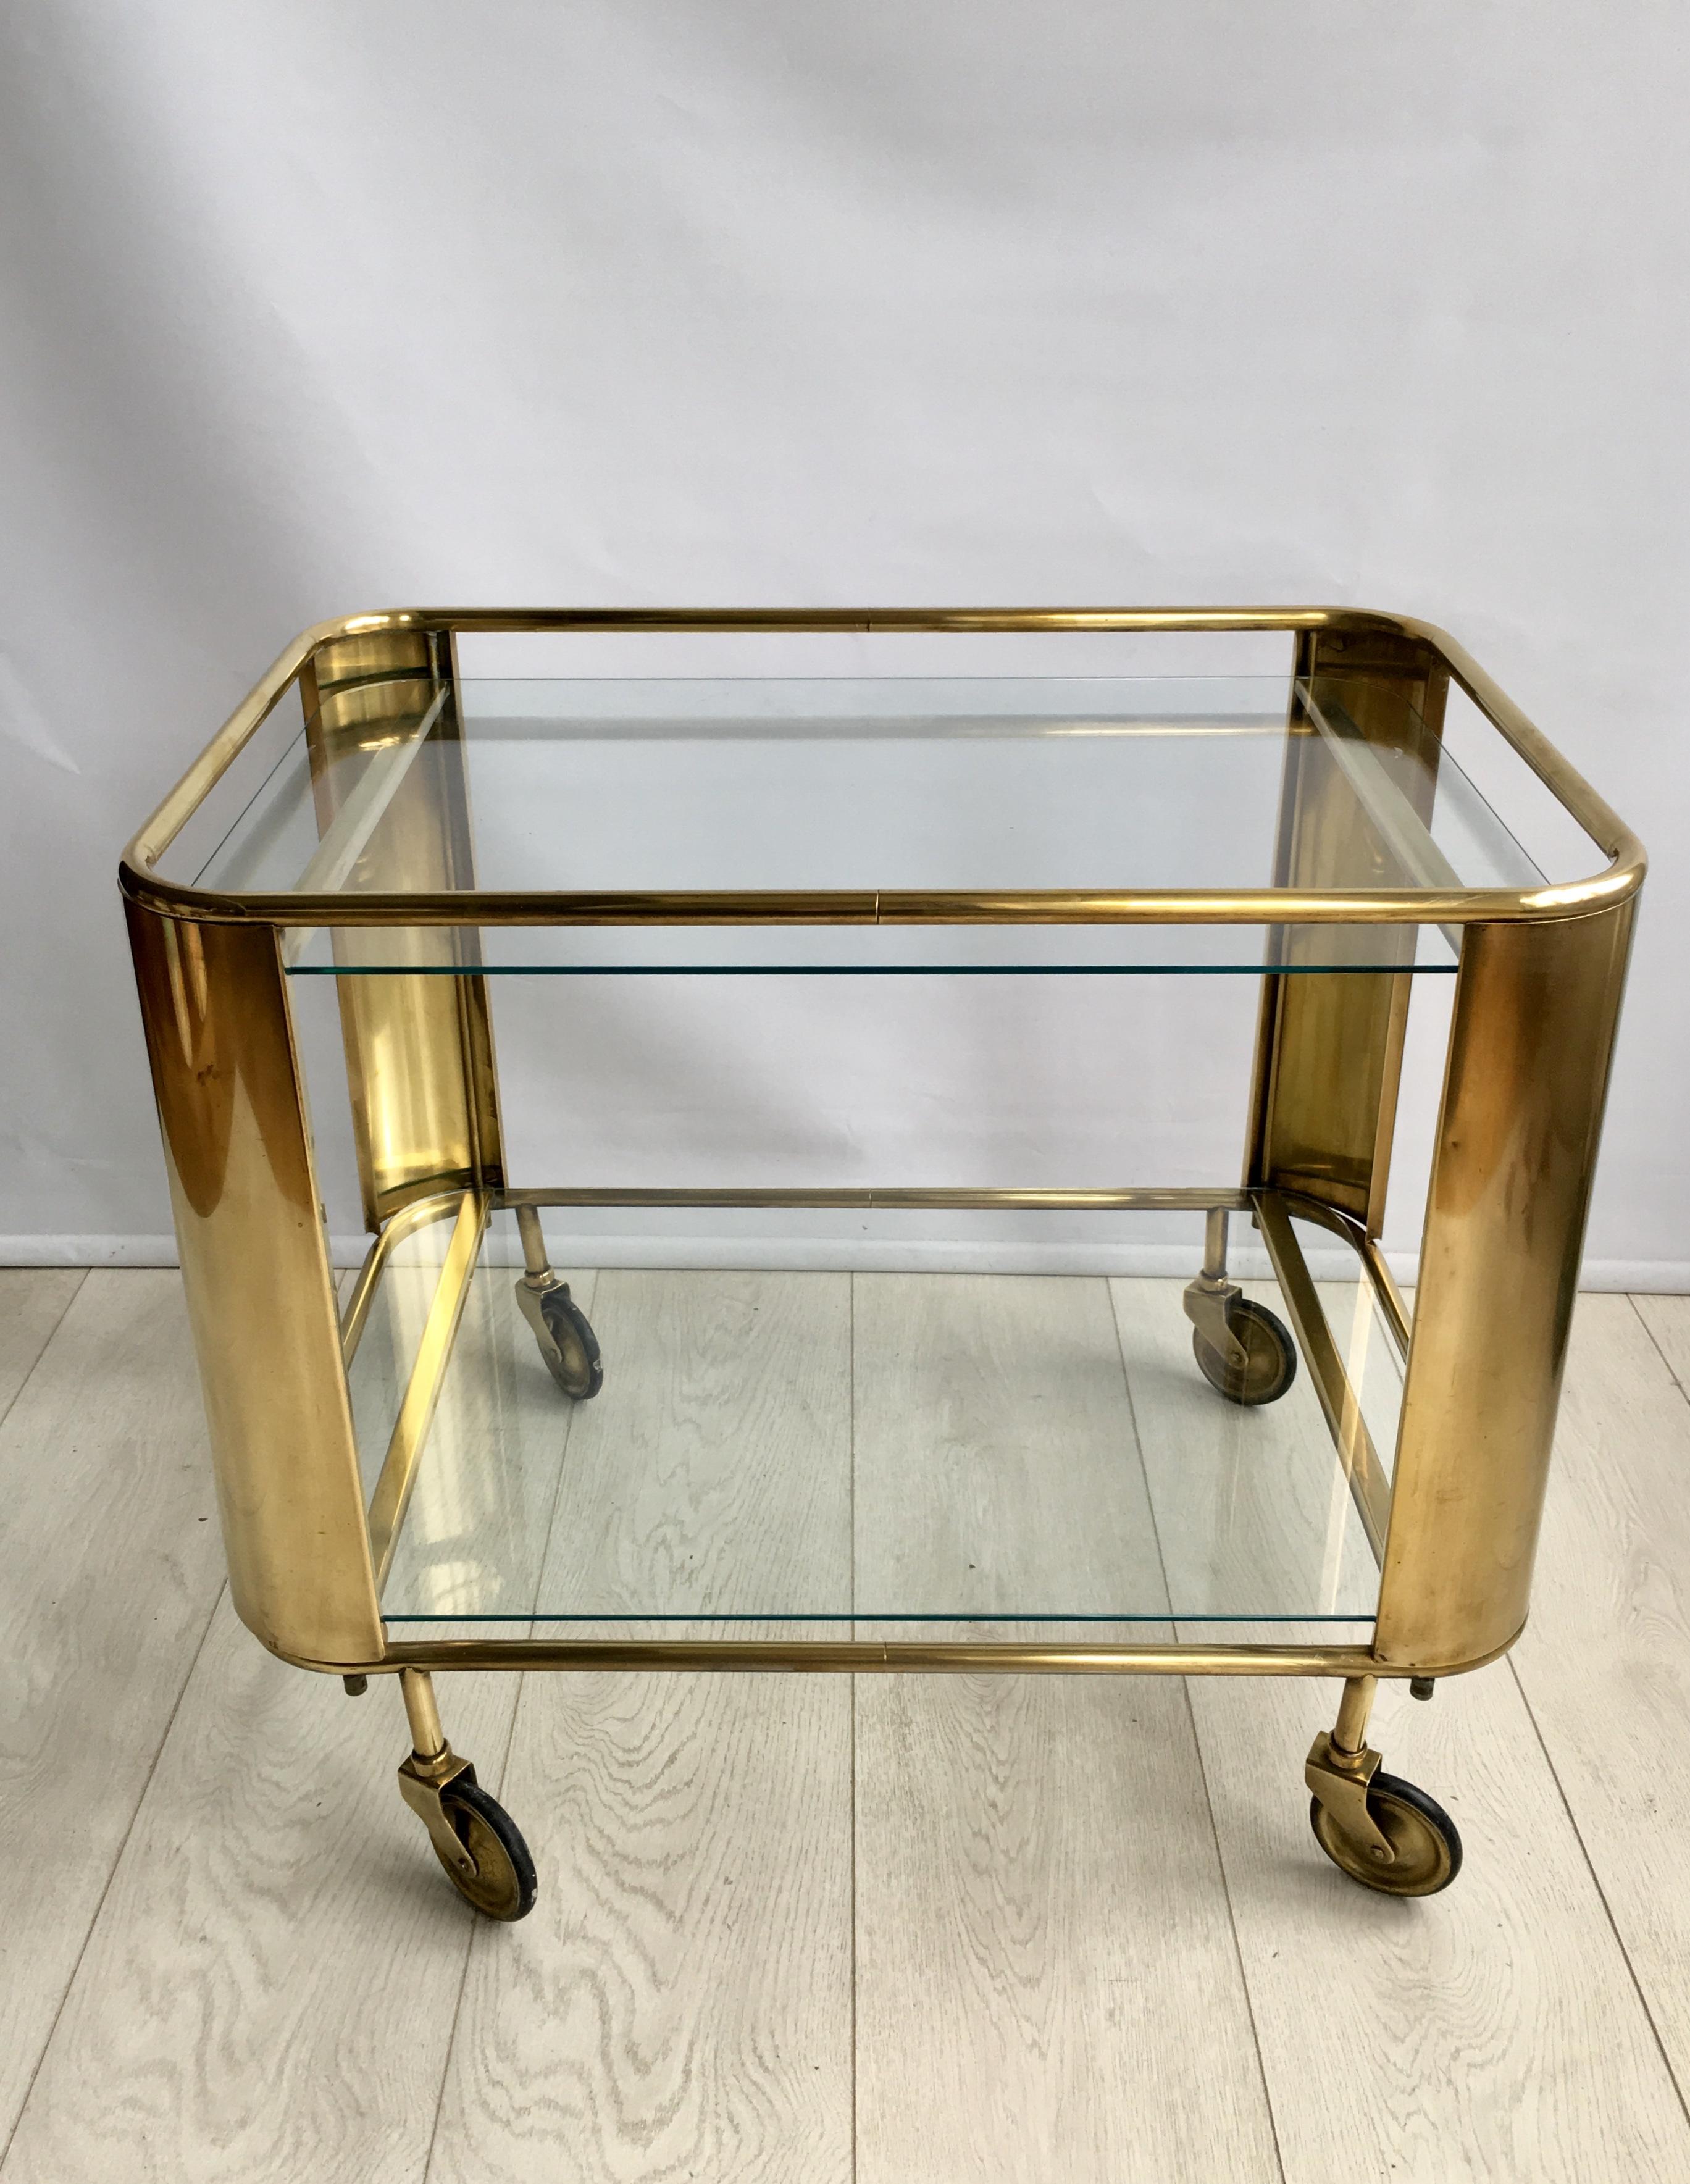 Beautifully simple in design this vintage drinks trolley 

Polished brass frame with 2 clear glass shelves

Original wheels, perhaps slightly wonky as per image but still functional and the trolley is level.